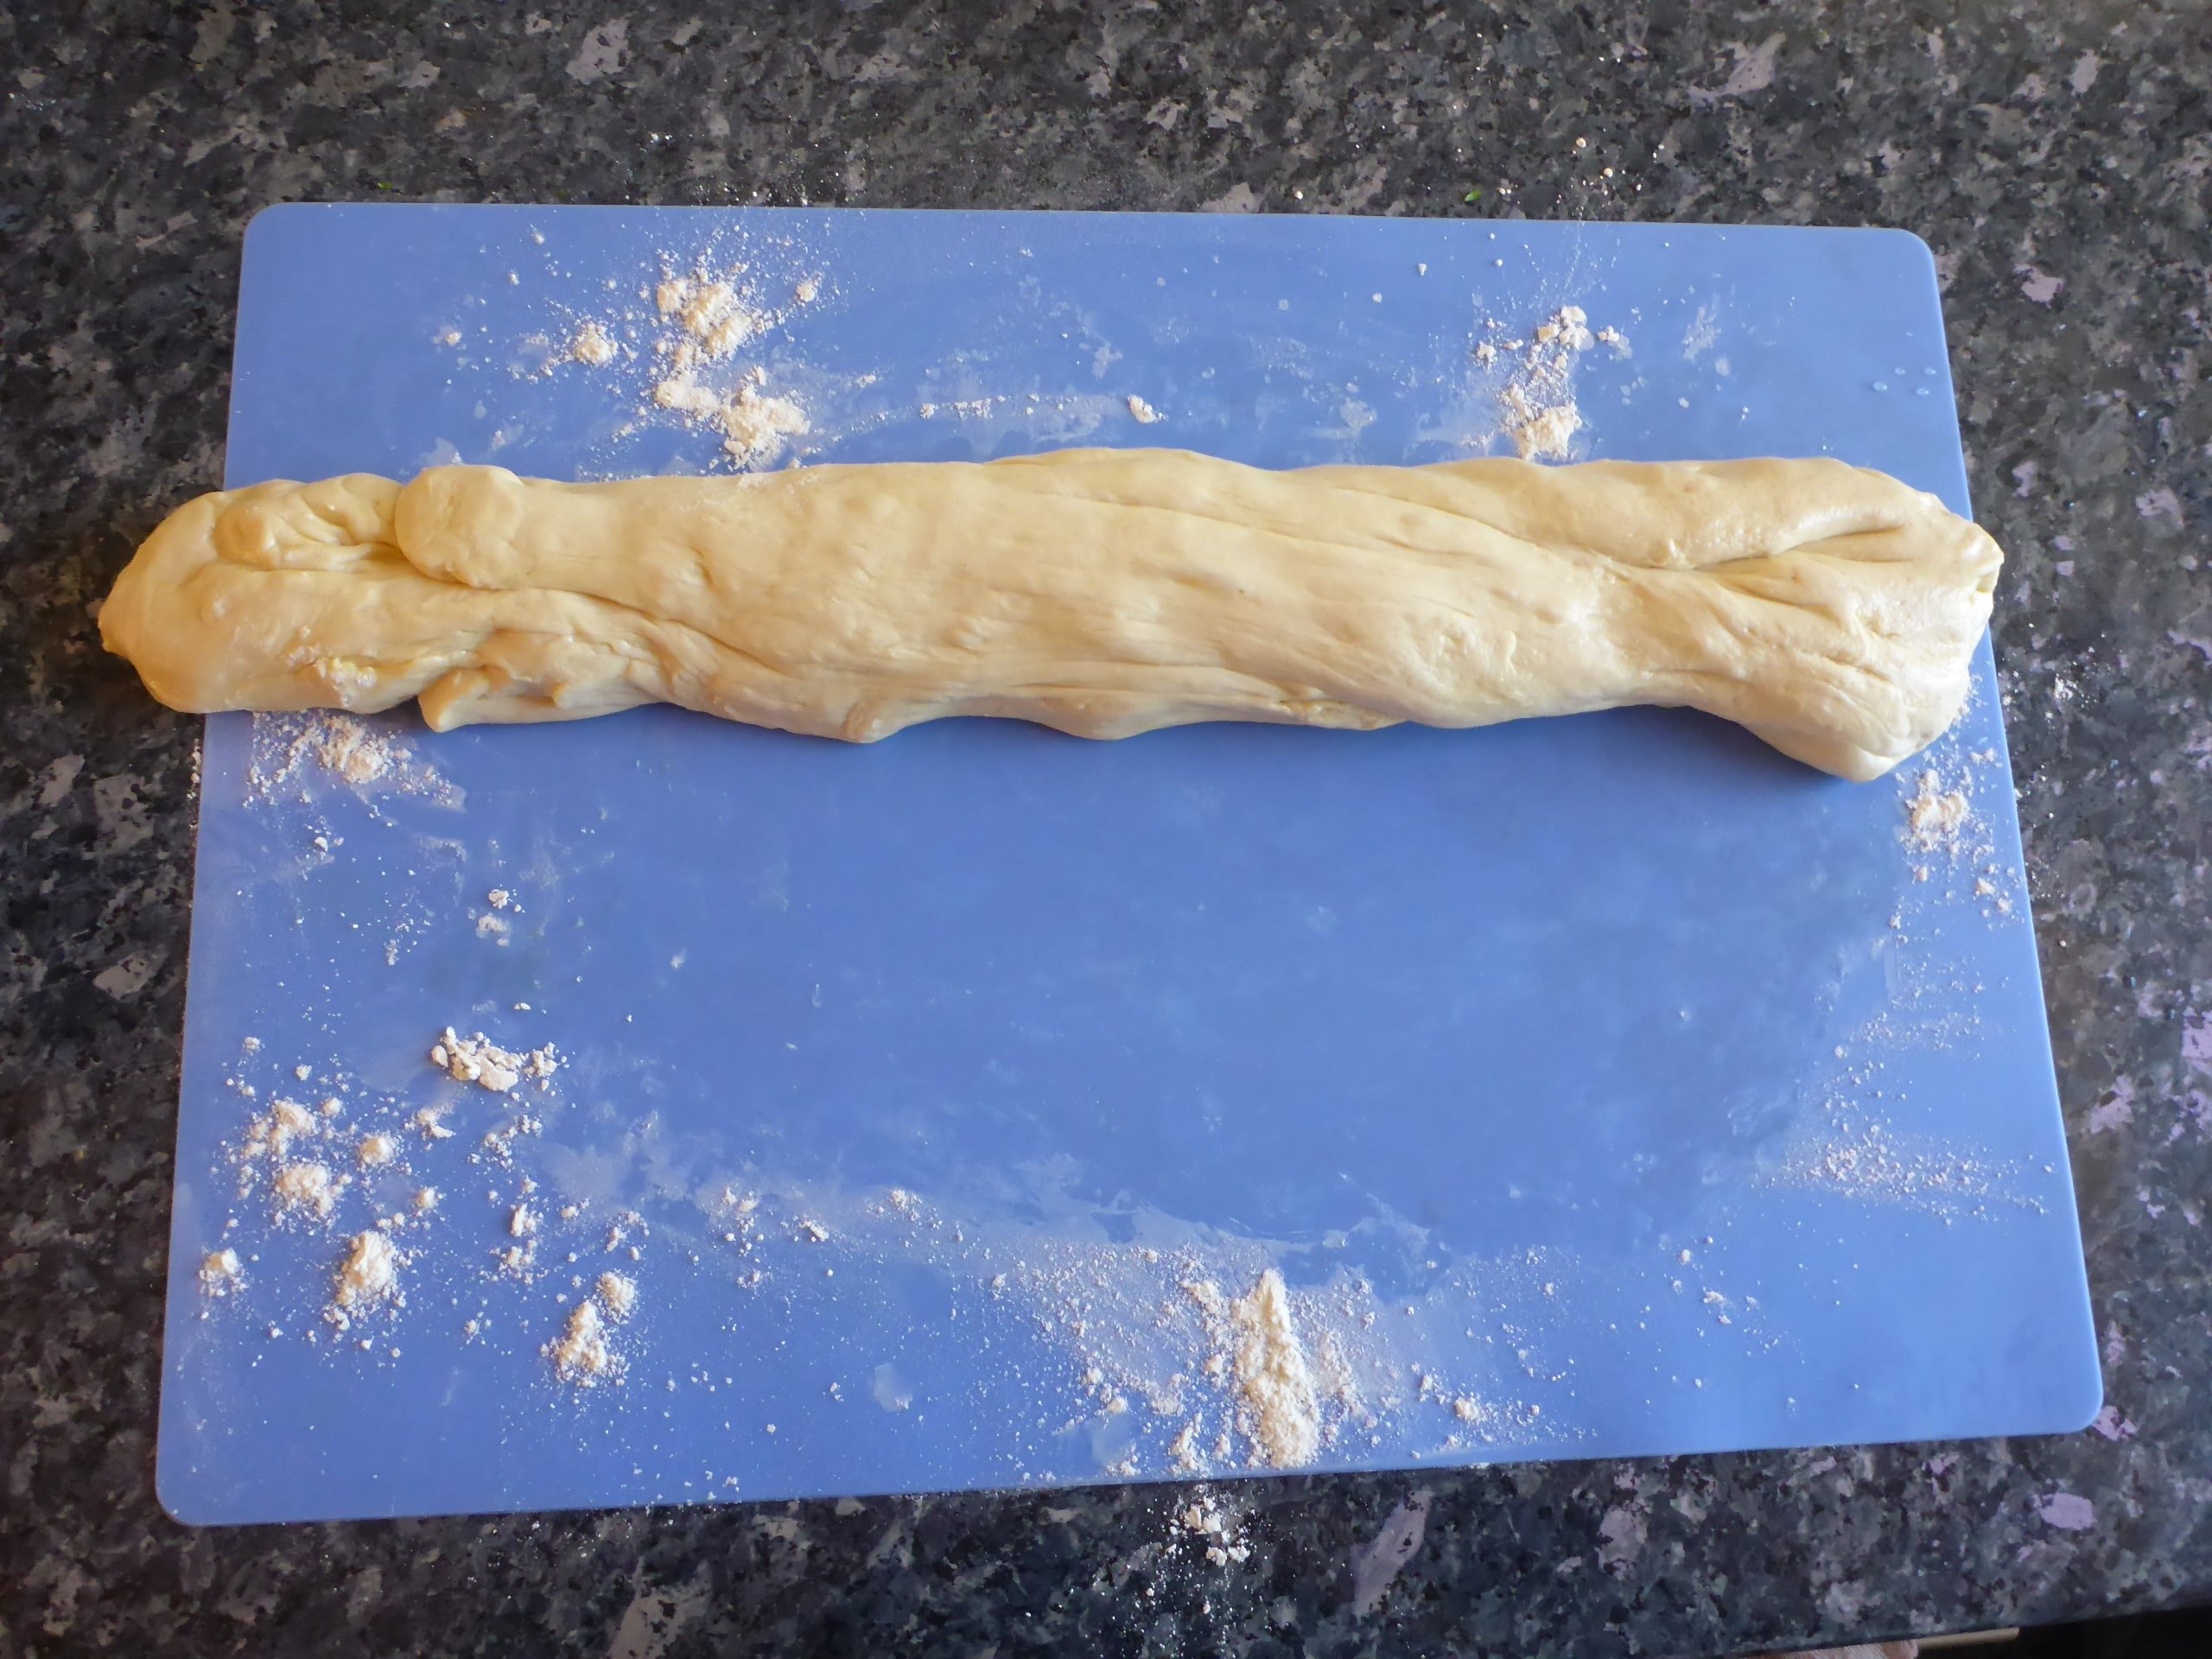 Yeast dough shaped into a long loaf after the first rise.